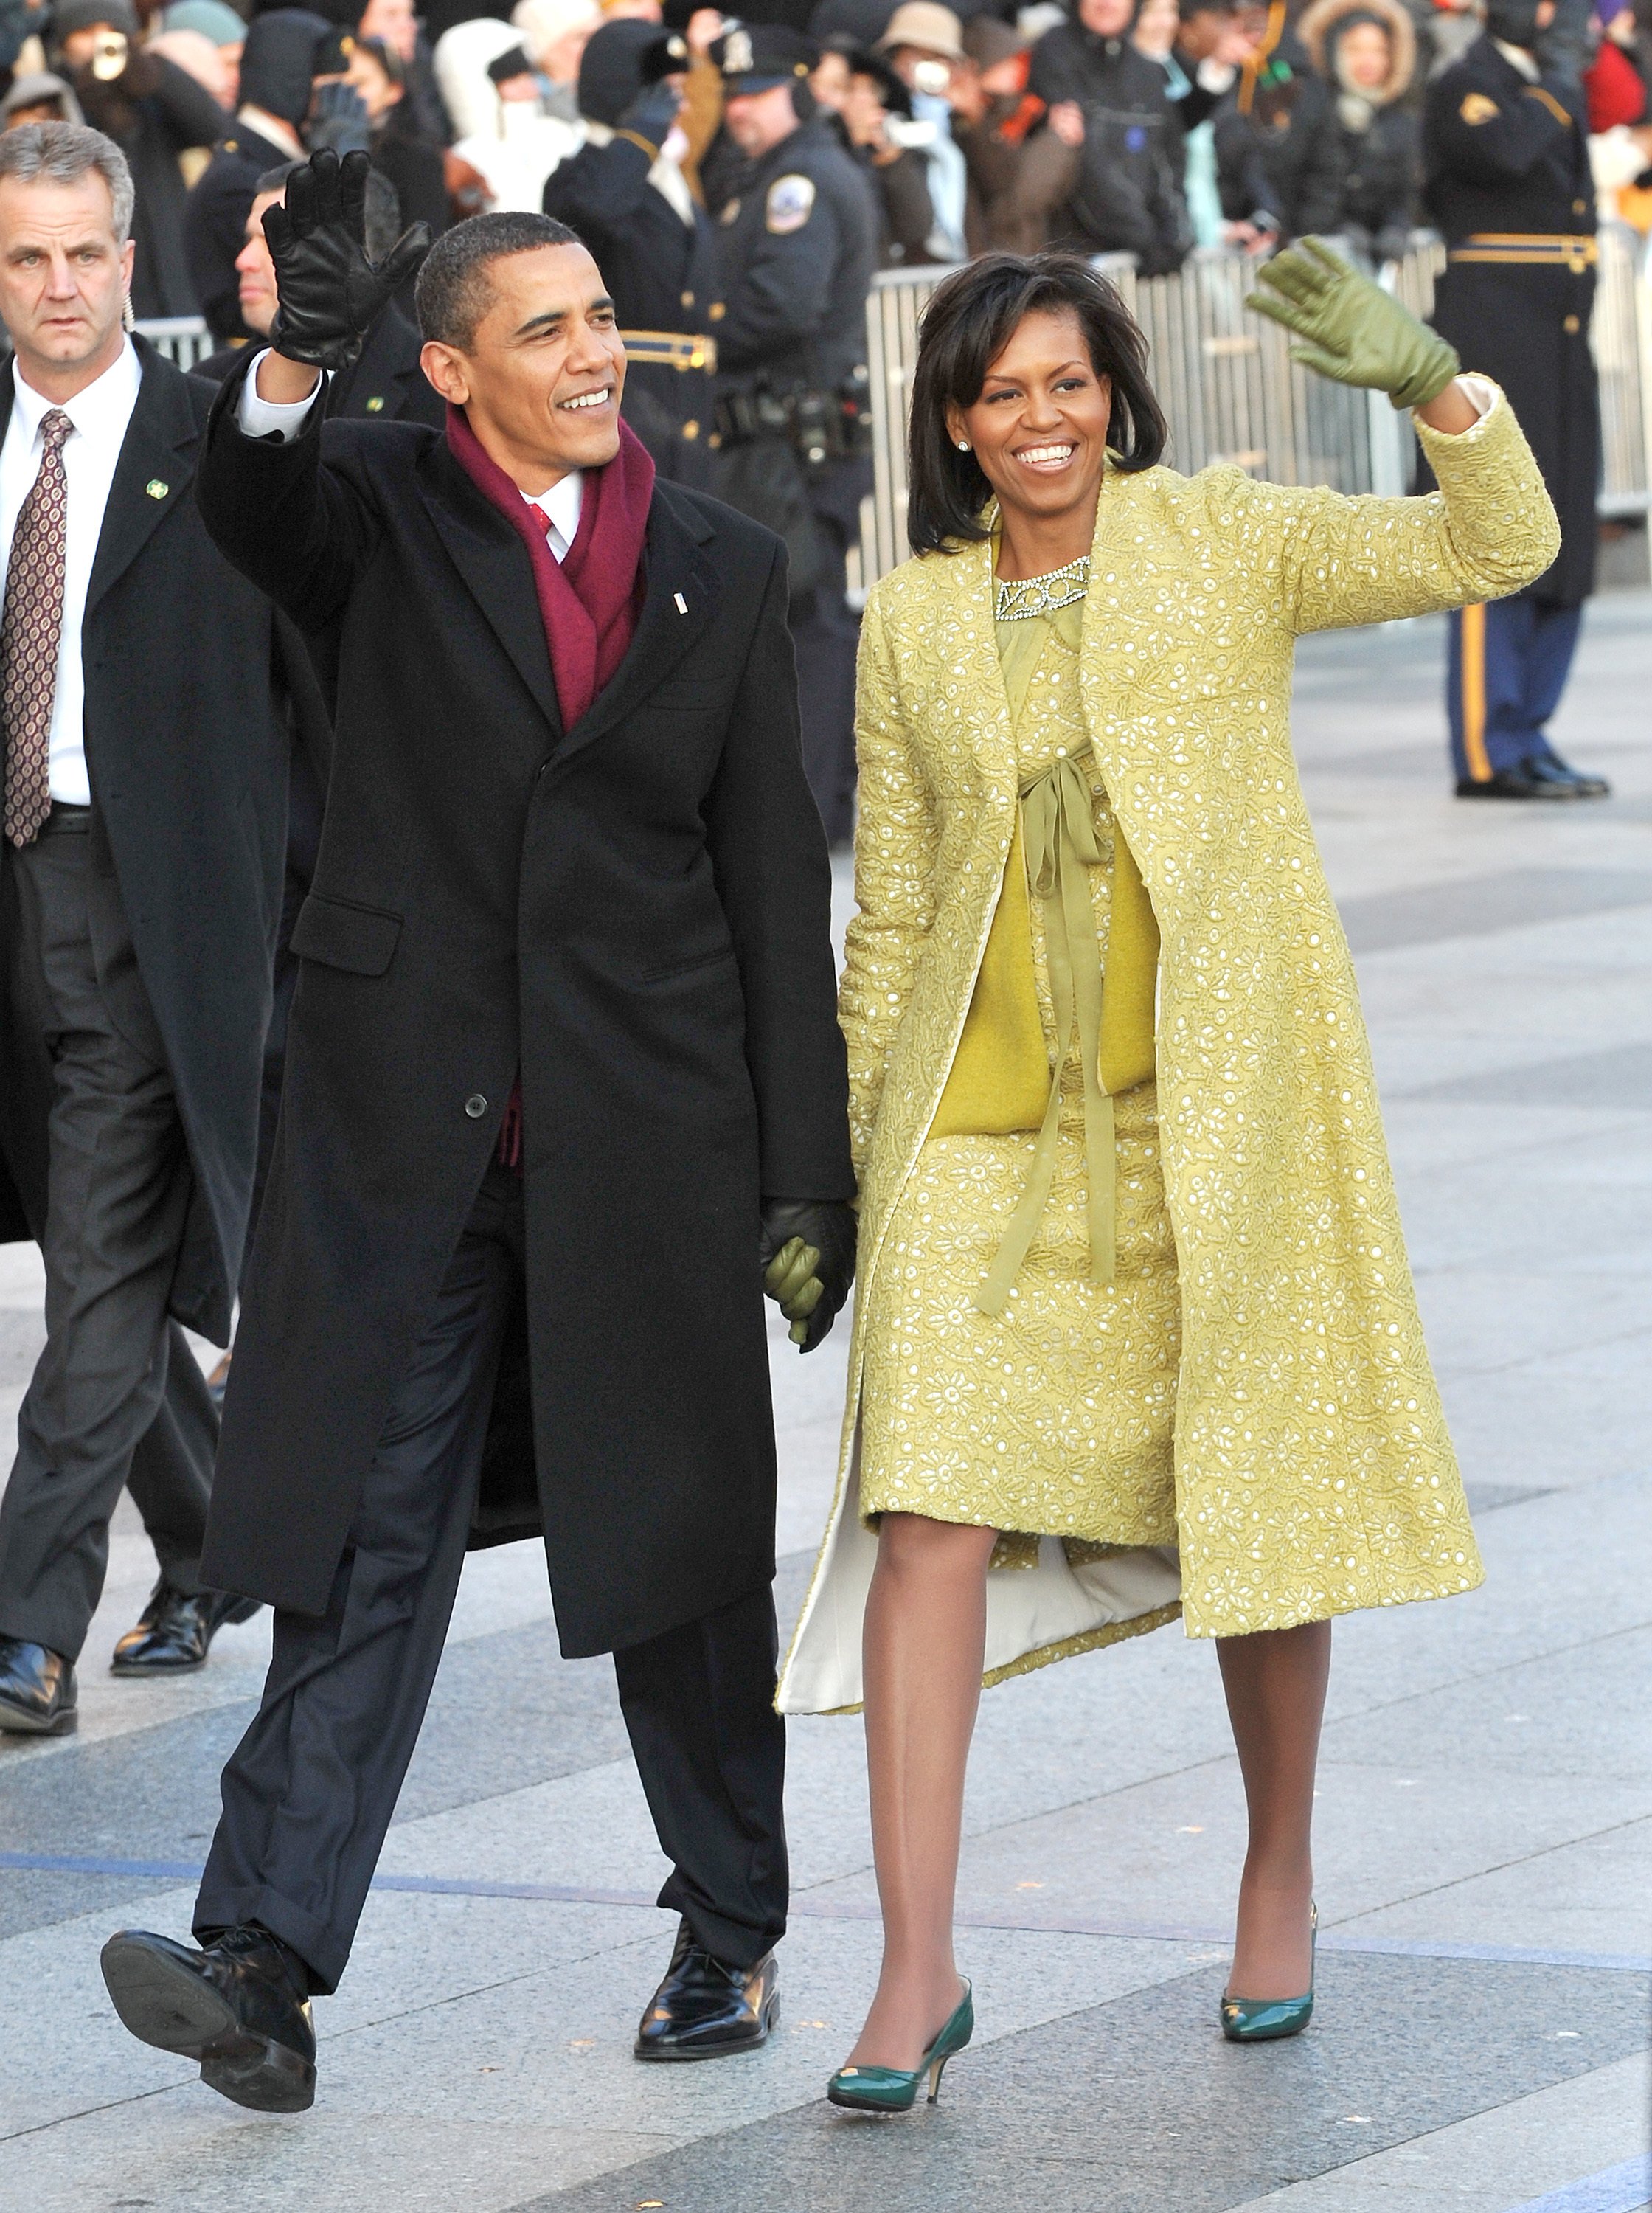 Michelle and Barack Obama during the inaugural parade in Washington, DC in January 2009. | Photo: Getty Images